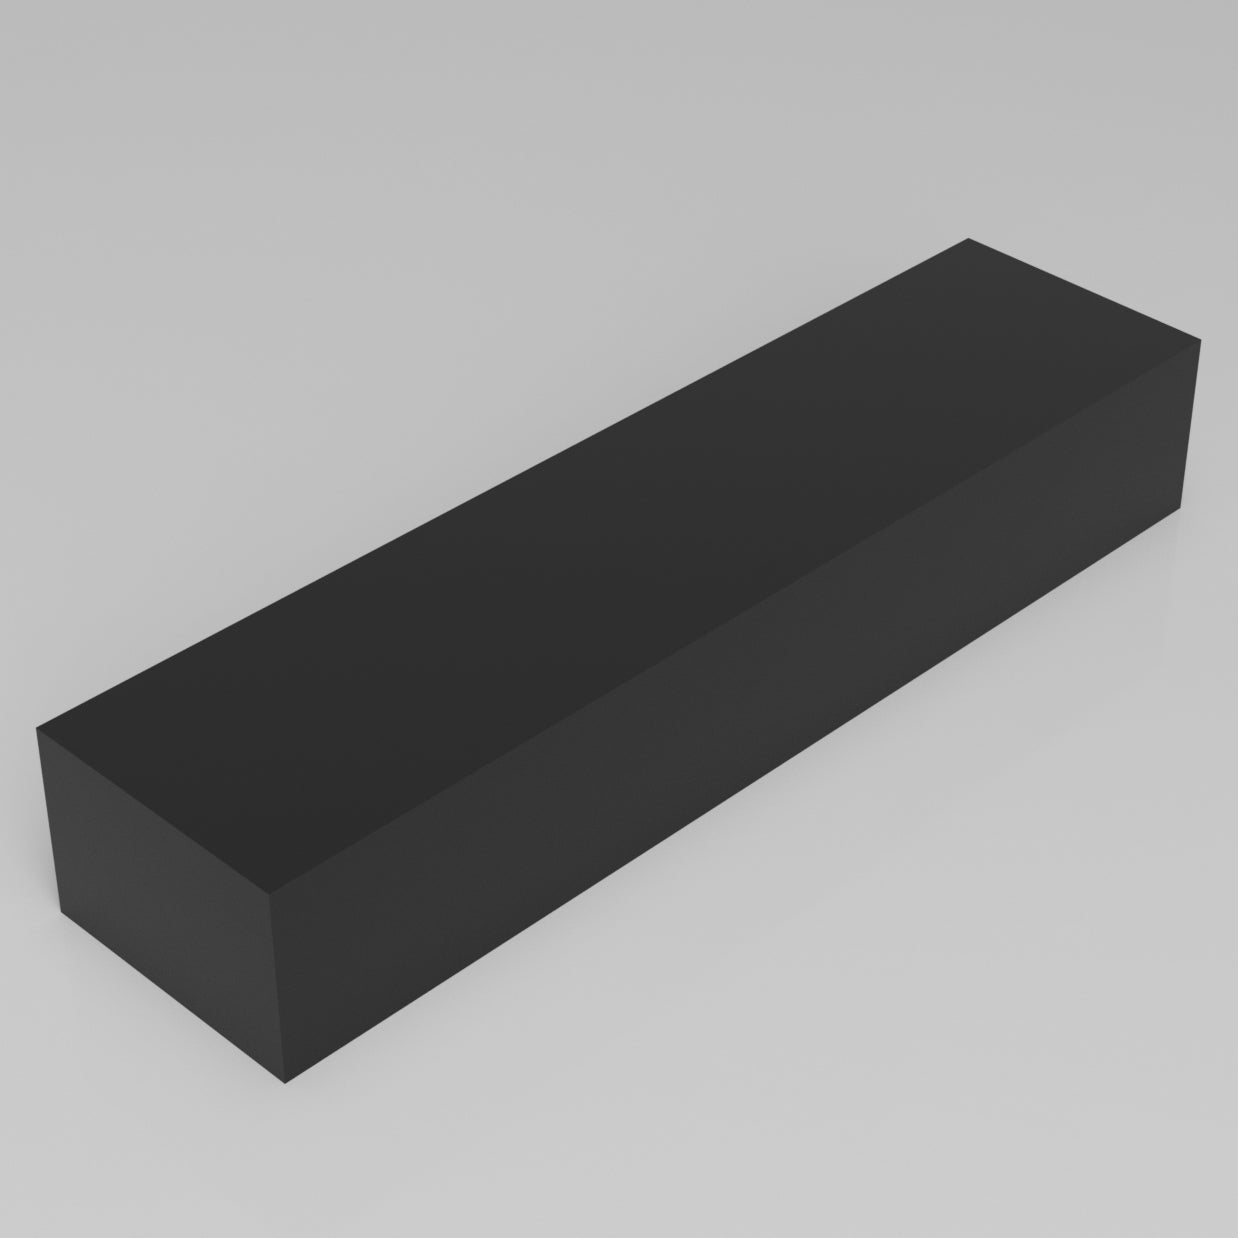 Machinable Wax Rectangular Block Front View 4 Inch by 6 Inch by 24 Inch